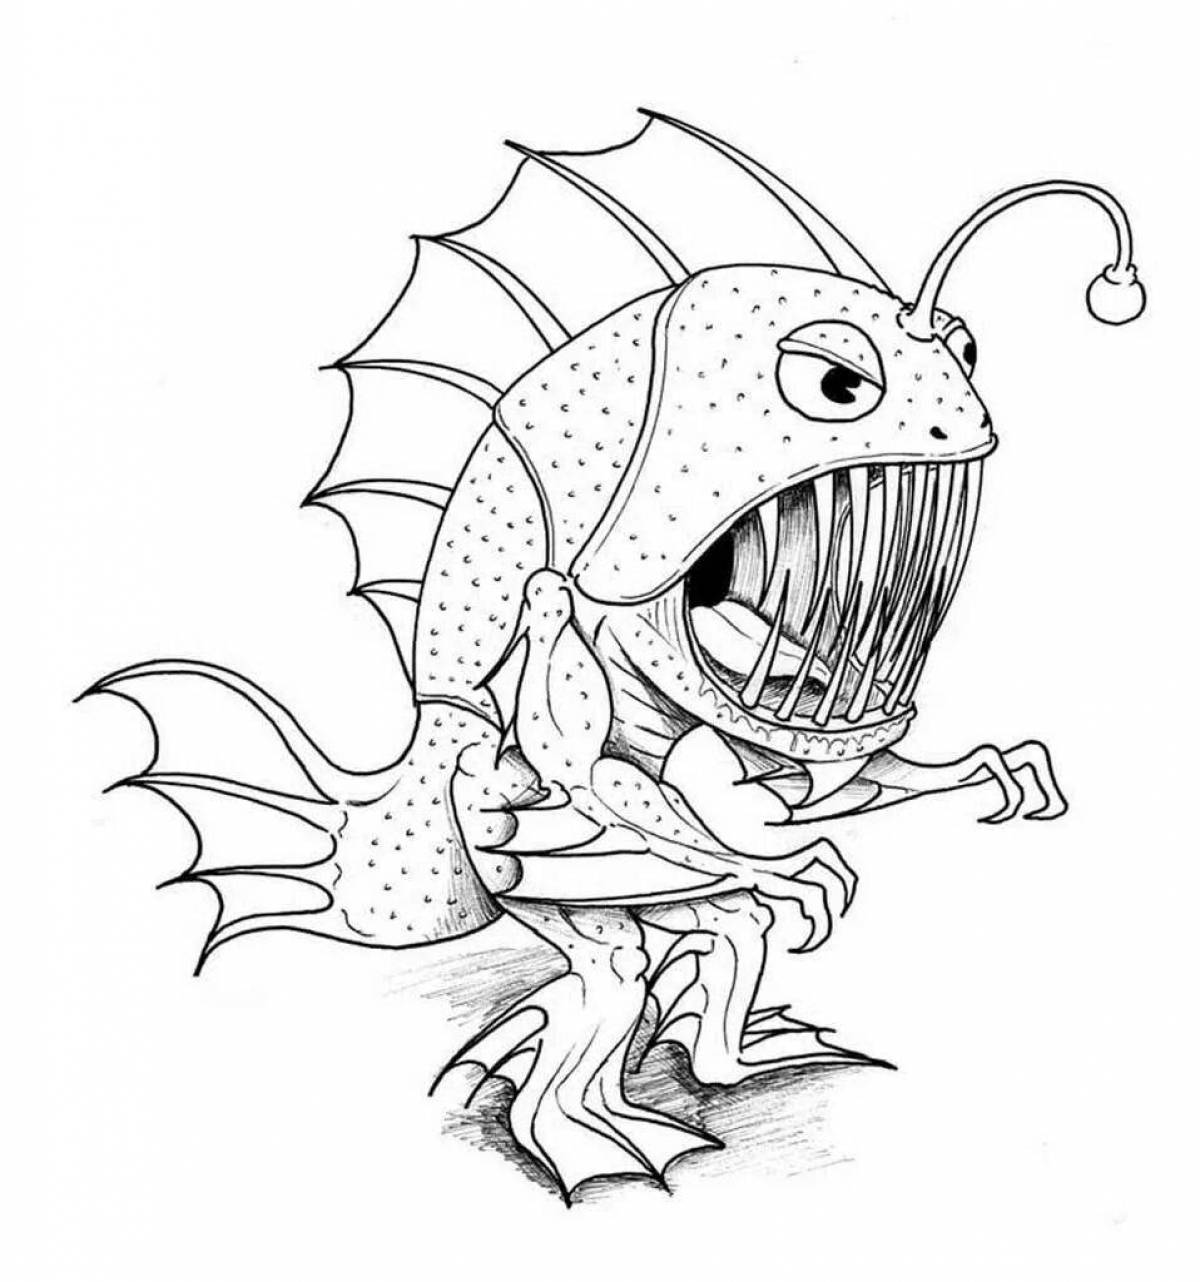 Maxi monsters amazing coloring pages